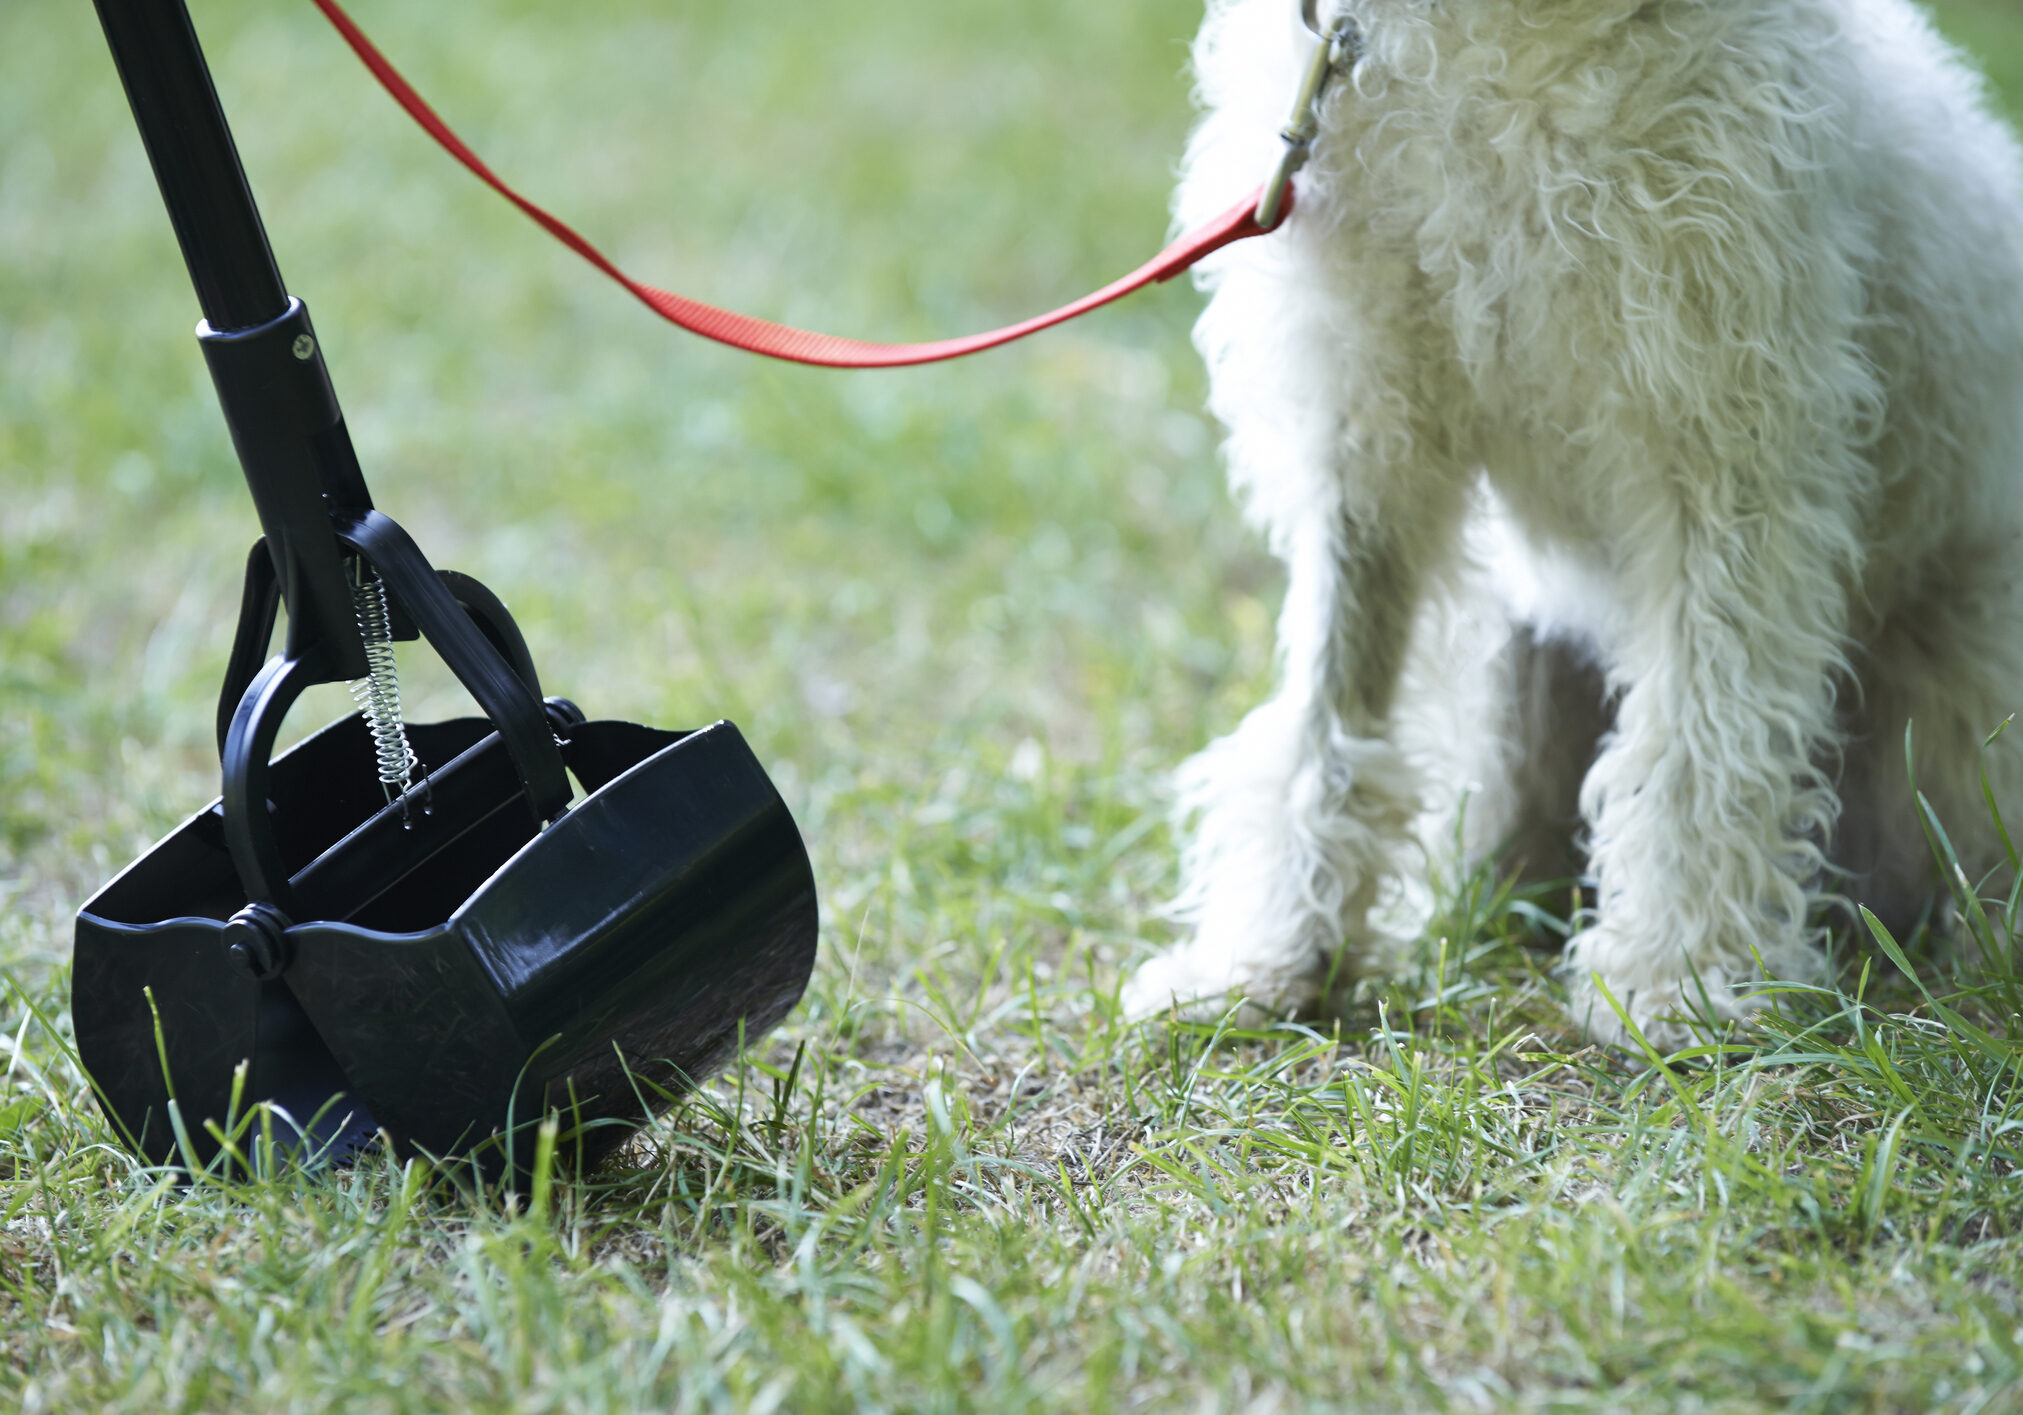 Owner Clearing Dog Mess With Pooper Scooper